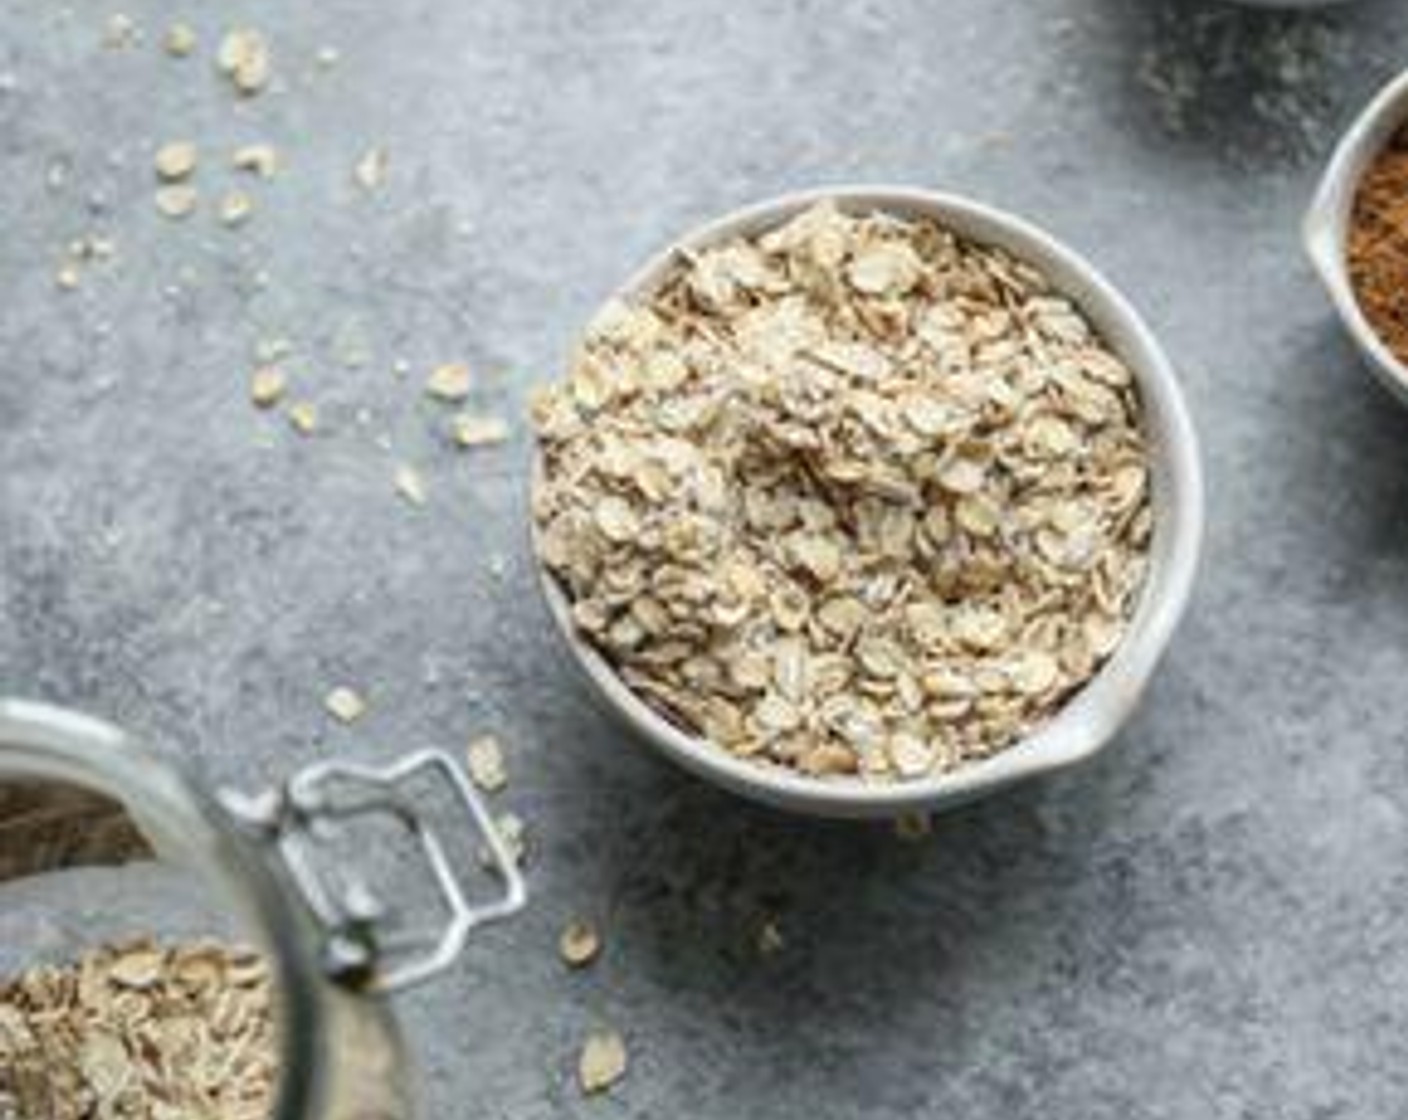 step 2 In a small food processor, add the Gluten-Free Rolled Oats (2 1/4 cups), Unsweetened Coconut Flakes (1/2 cup), and Sea Salt (to taste).  Pulse about seven or eight times, until the oats are broken down and coarsely ground. Transfer to a large bowl.